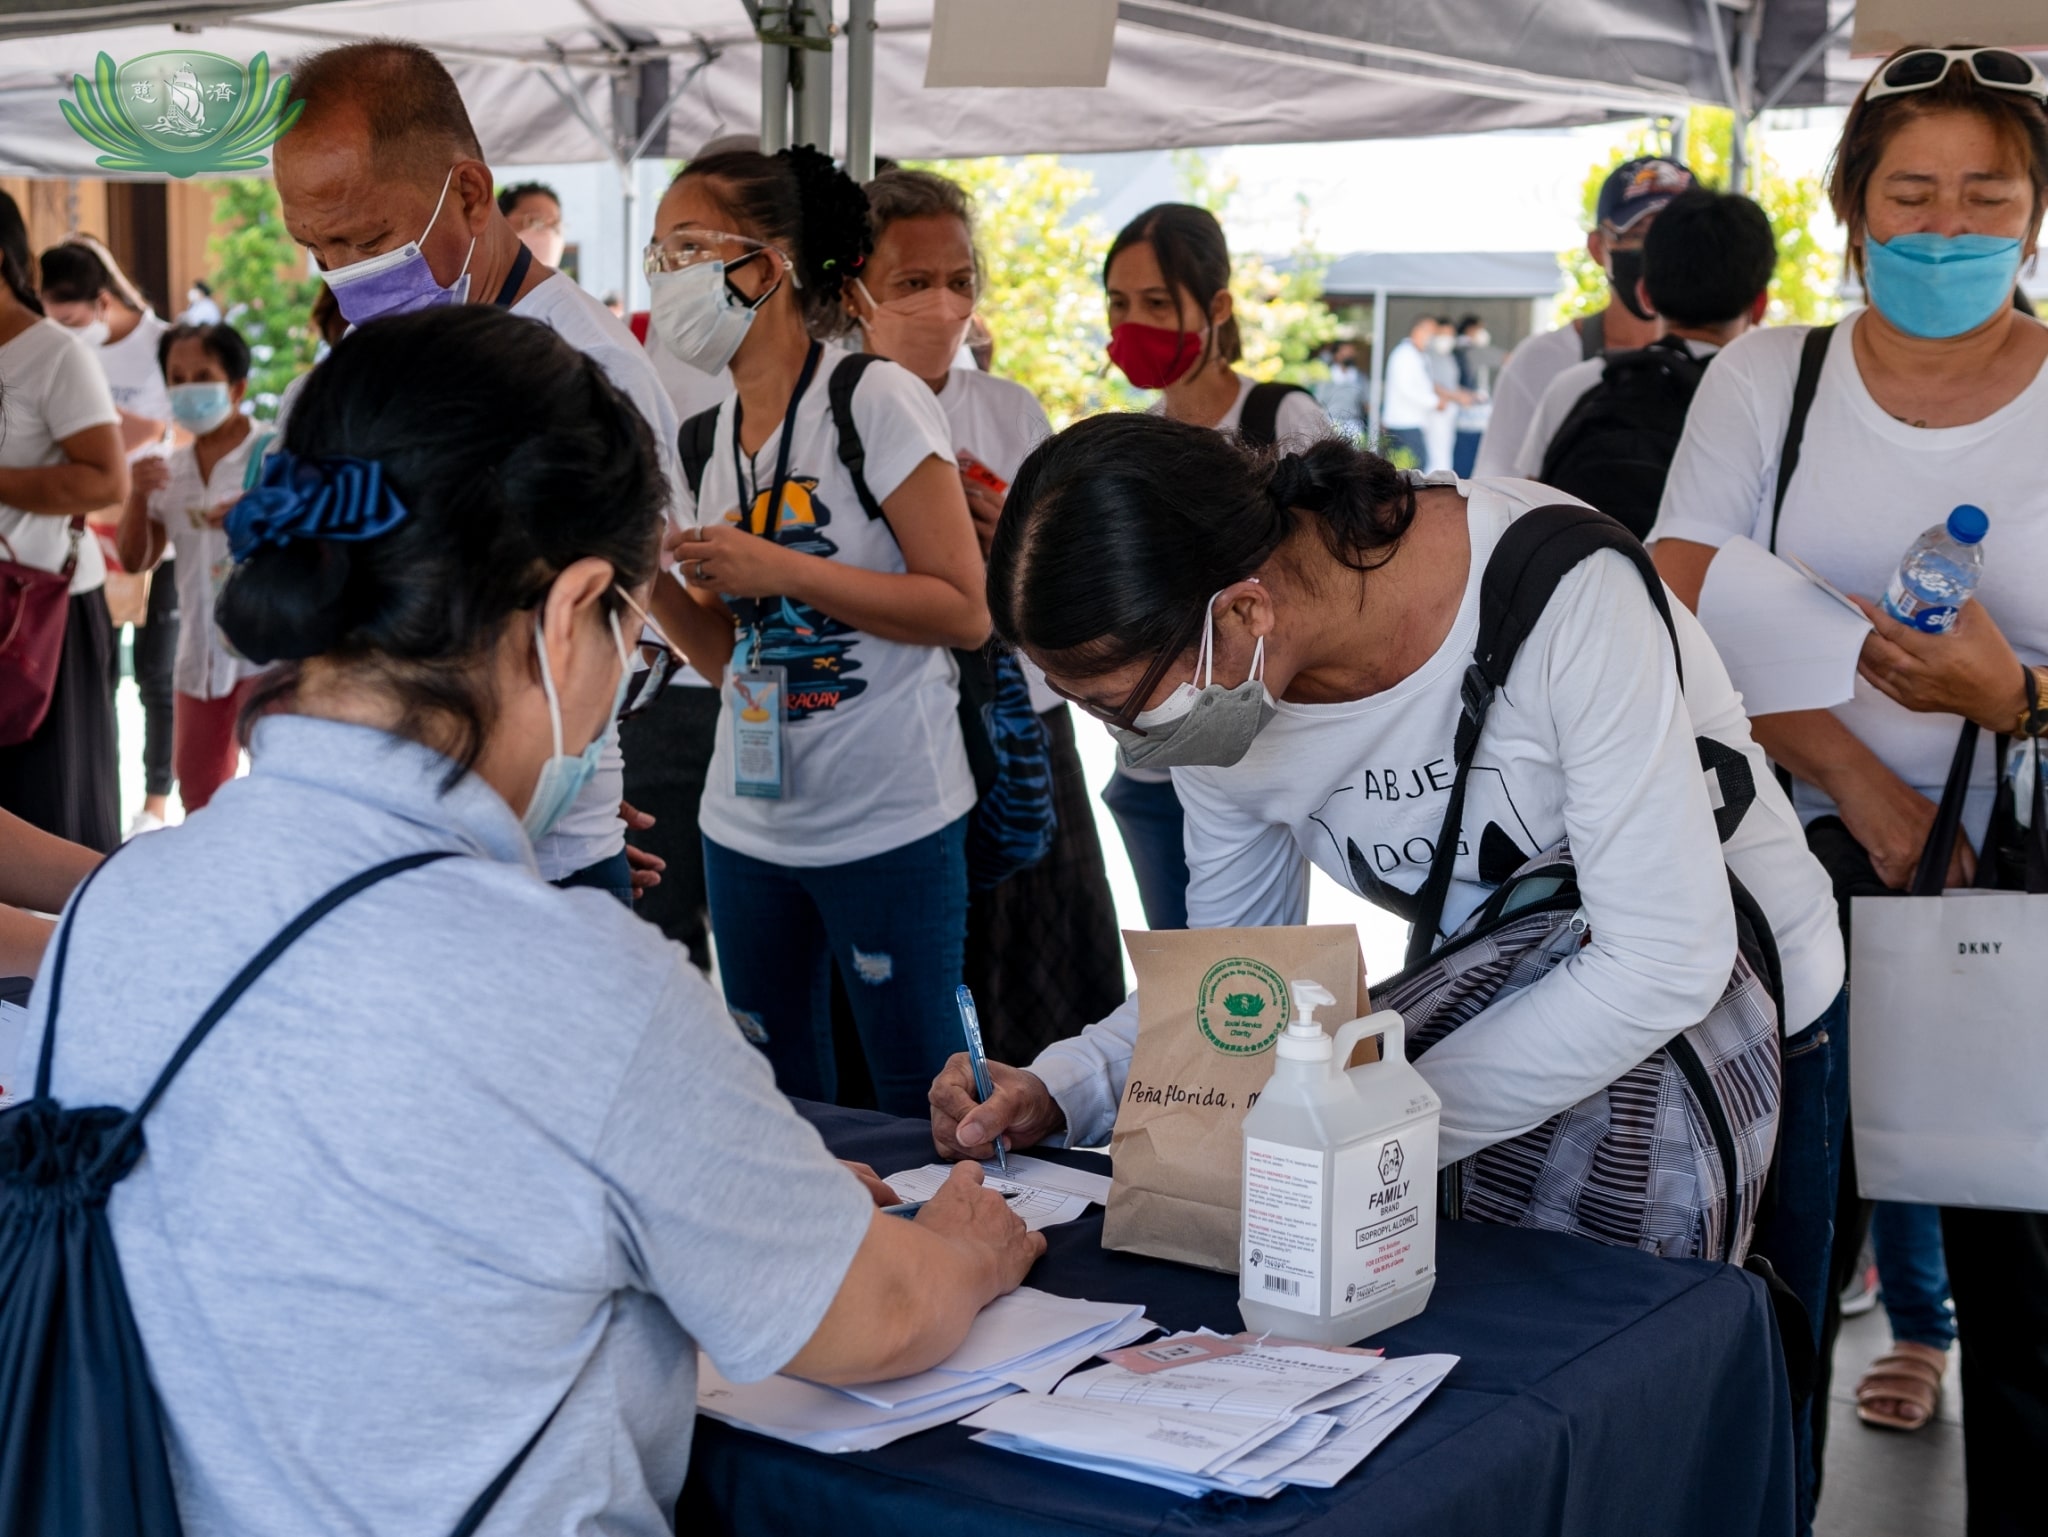 Beneficiaries and their families register to claim medical assistance at Tzu Chi Foundation’s first Charity Day for the year.【Photo by Daniel Lazar】